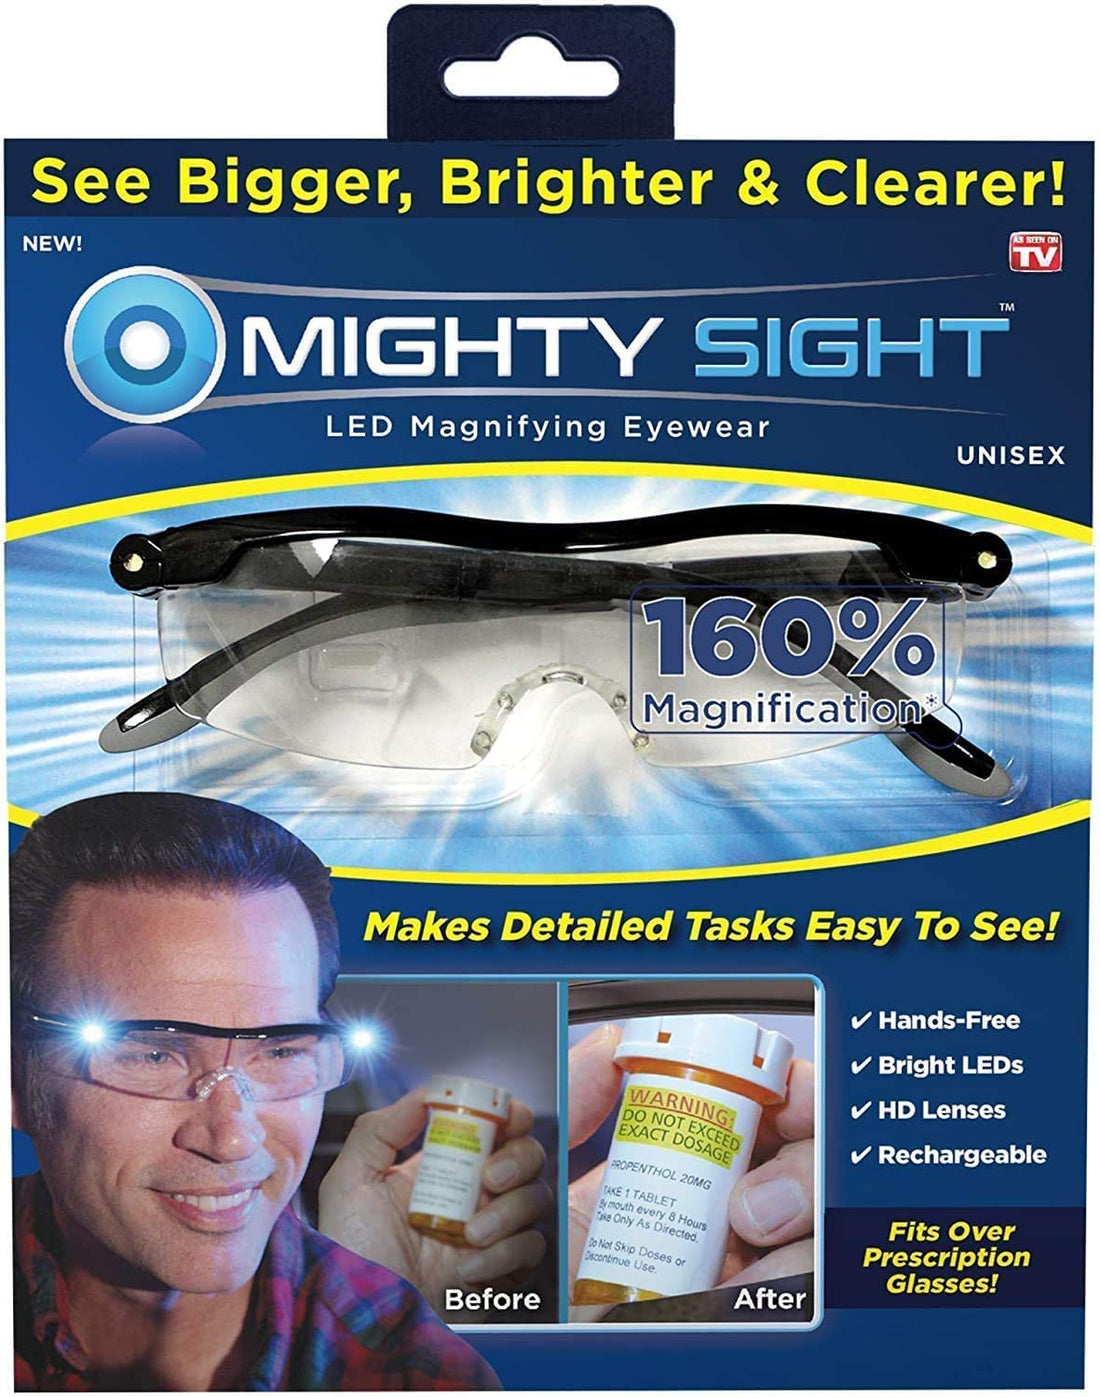 Mighty Sight Magnifying Glasses with LED Light & Travel Case - Great Eyeglasses for Readers, Women, Men, Kids - Use for Close Work or Reading Small Print & Labels - As Seen on TV